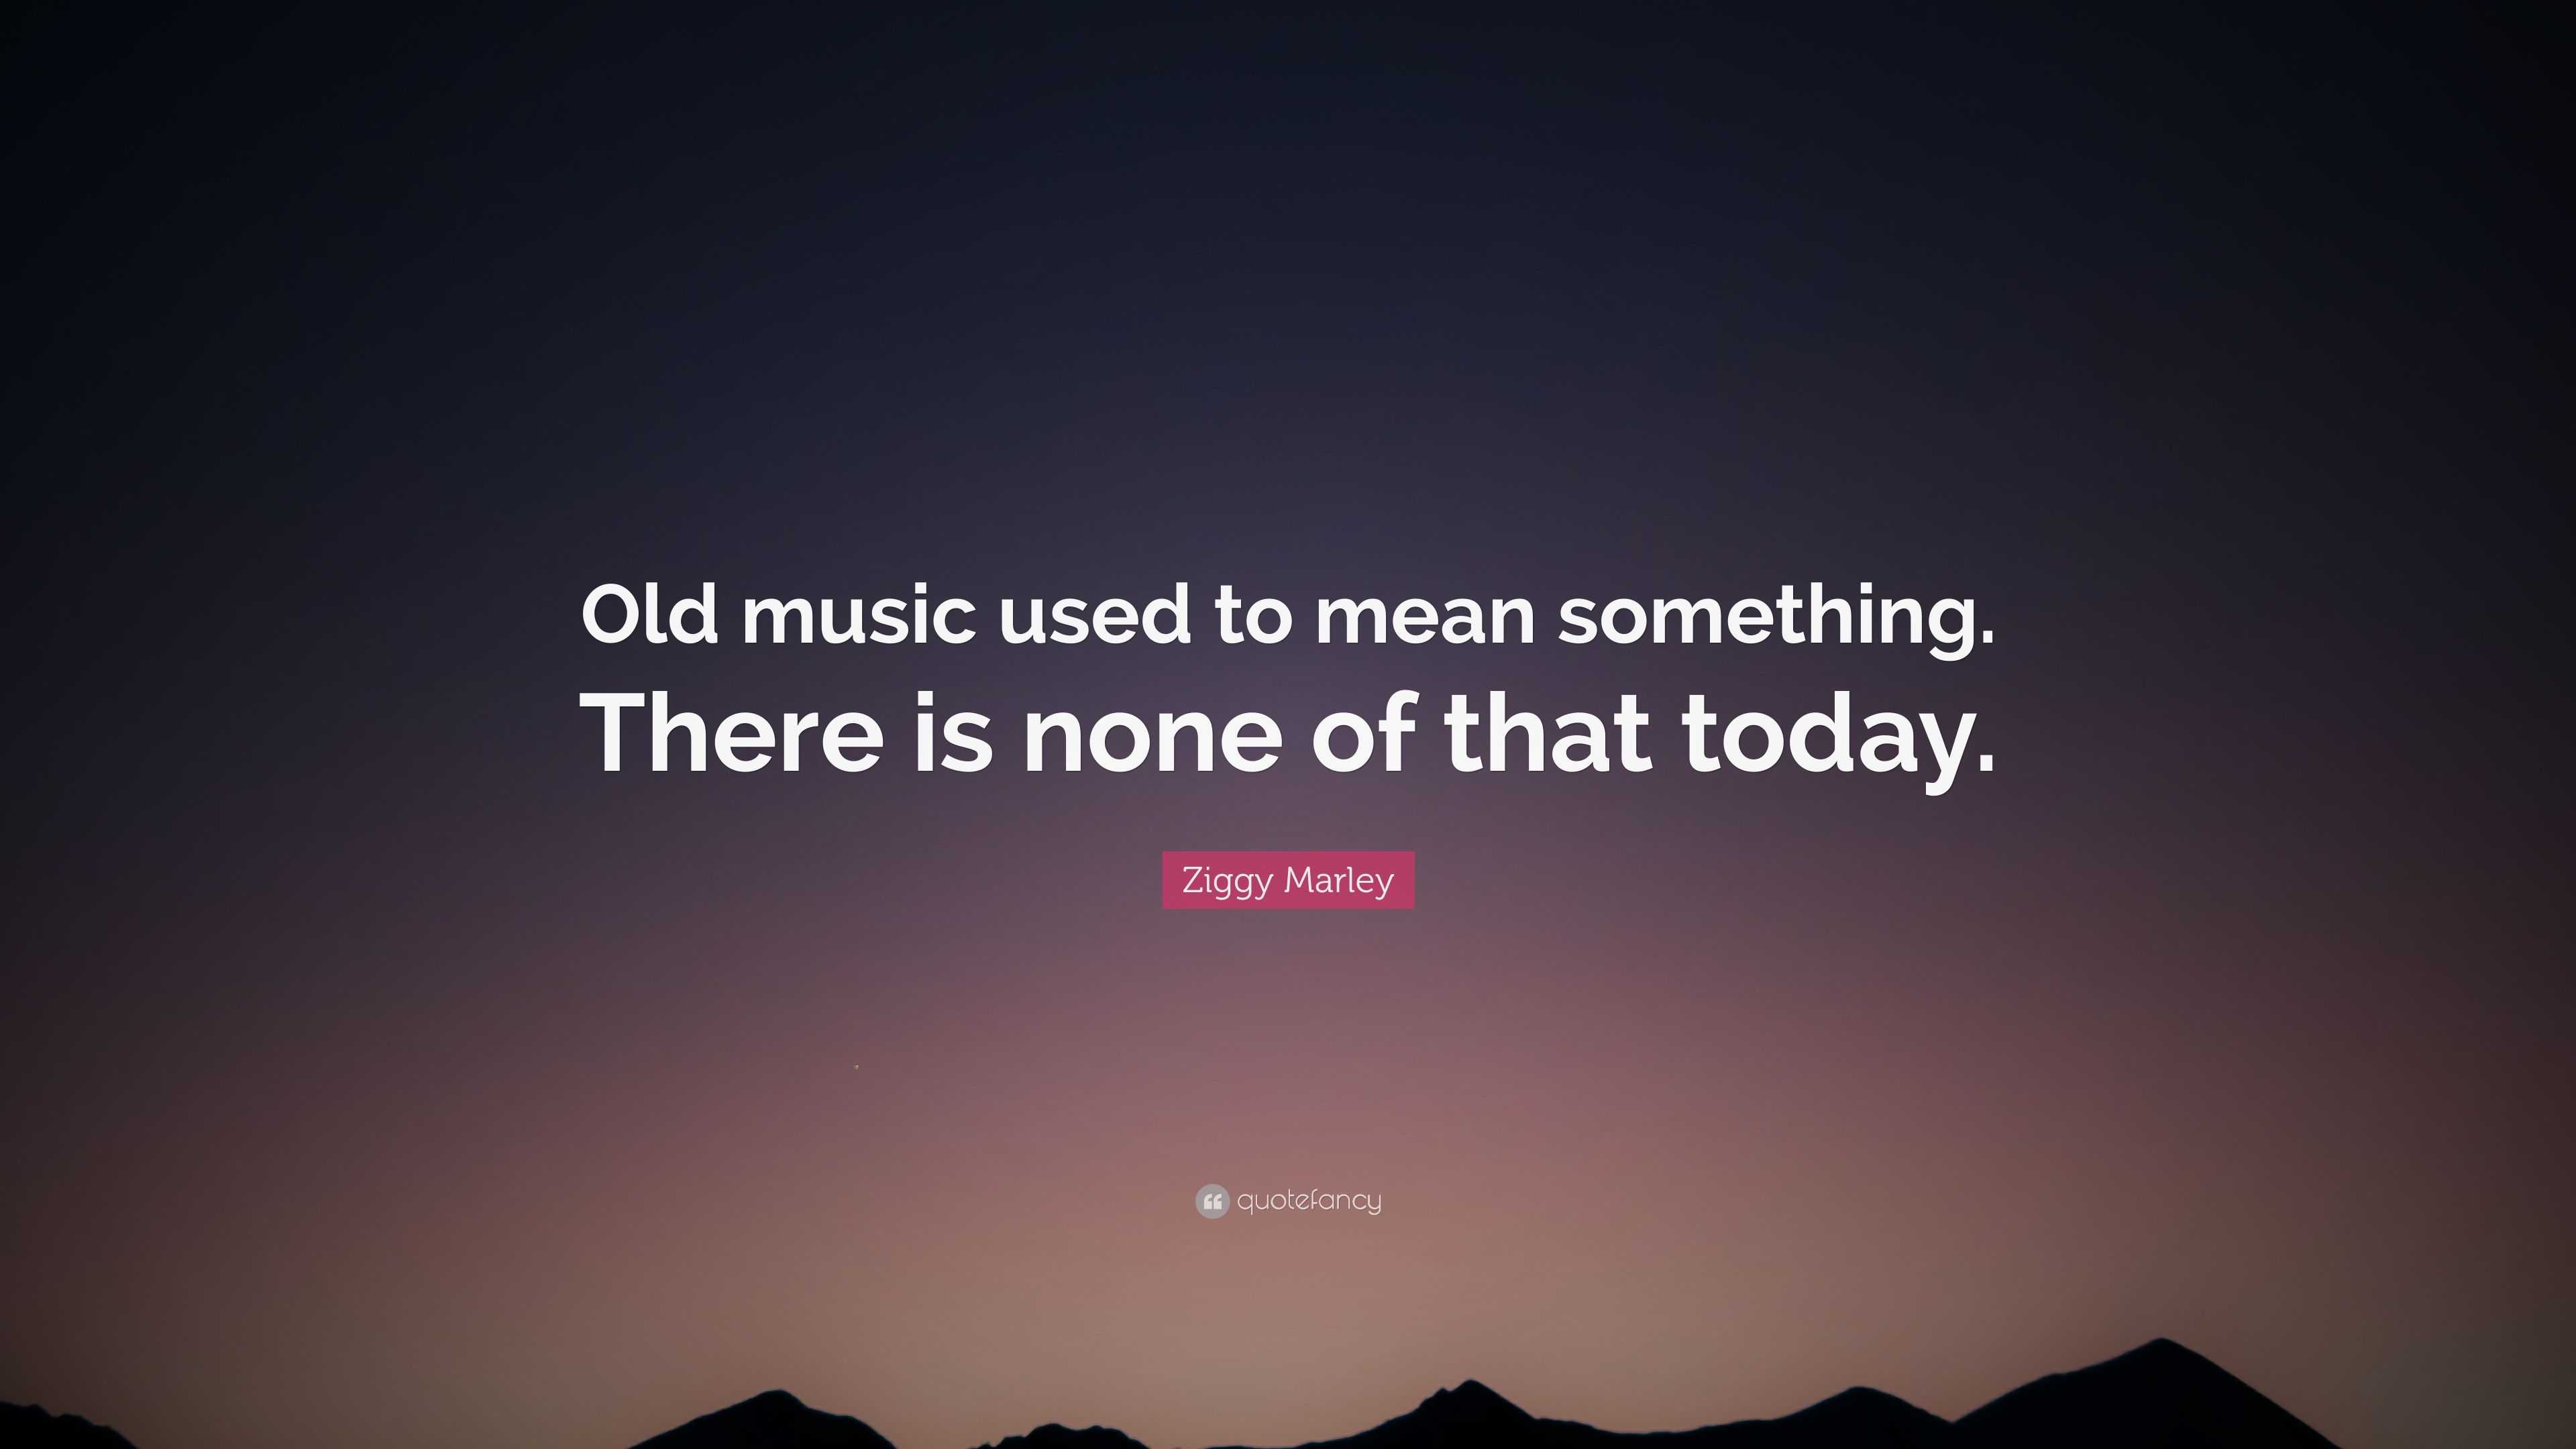 Is old music better?